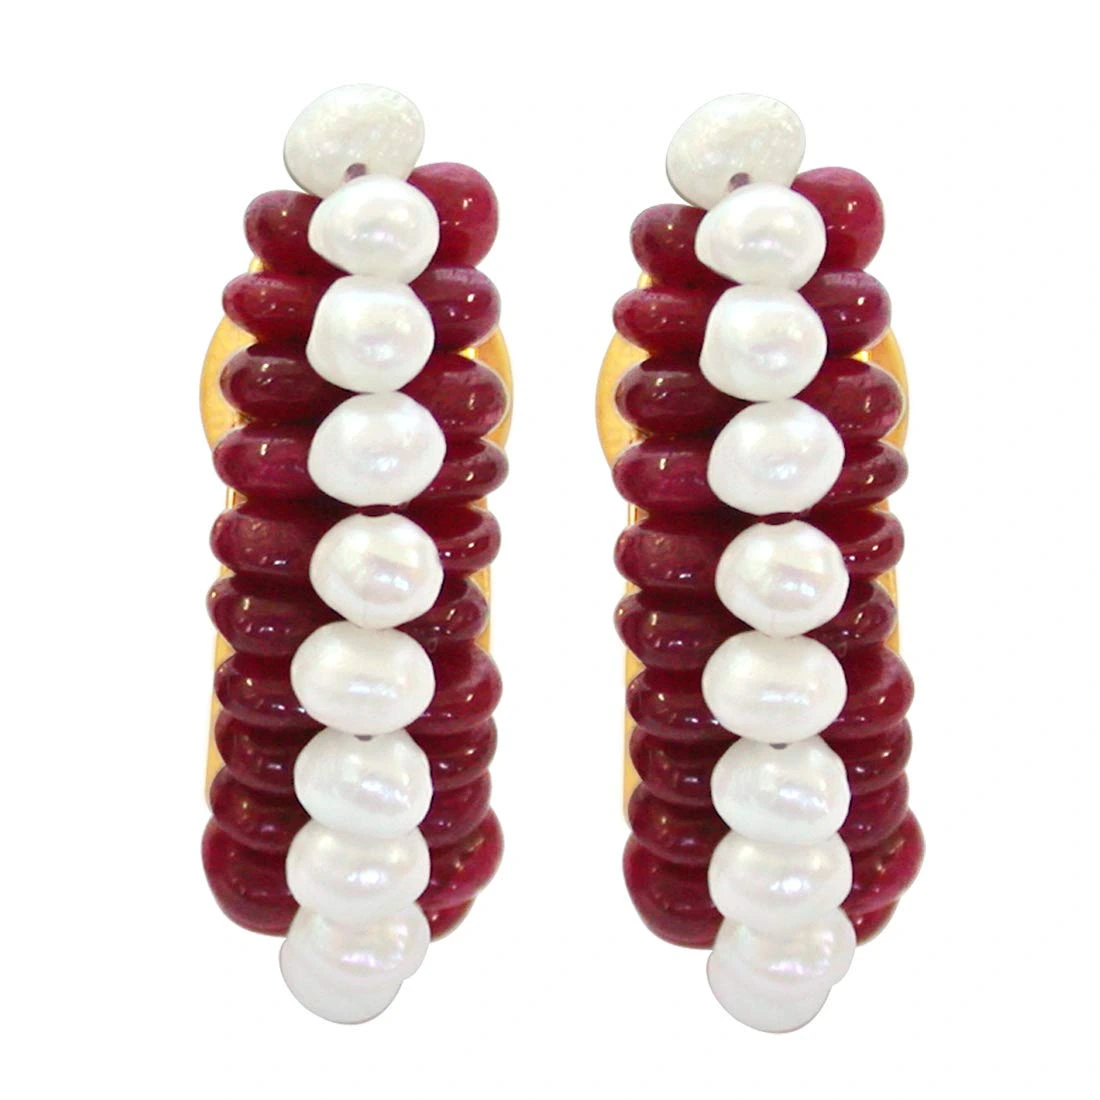 We are Forever - Real Ruby Beads & Freshwater Pearl Bali Style Earrings for Women (SE79)